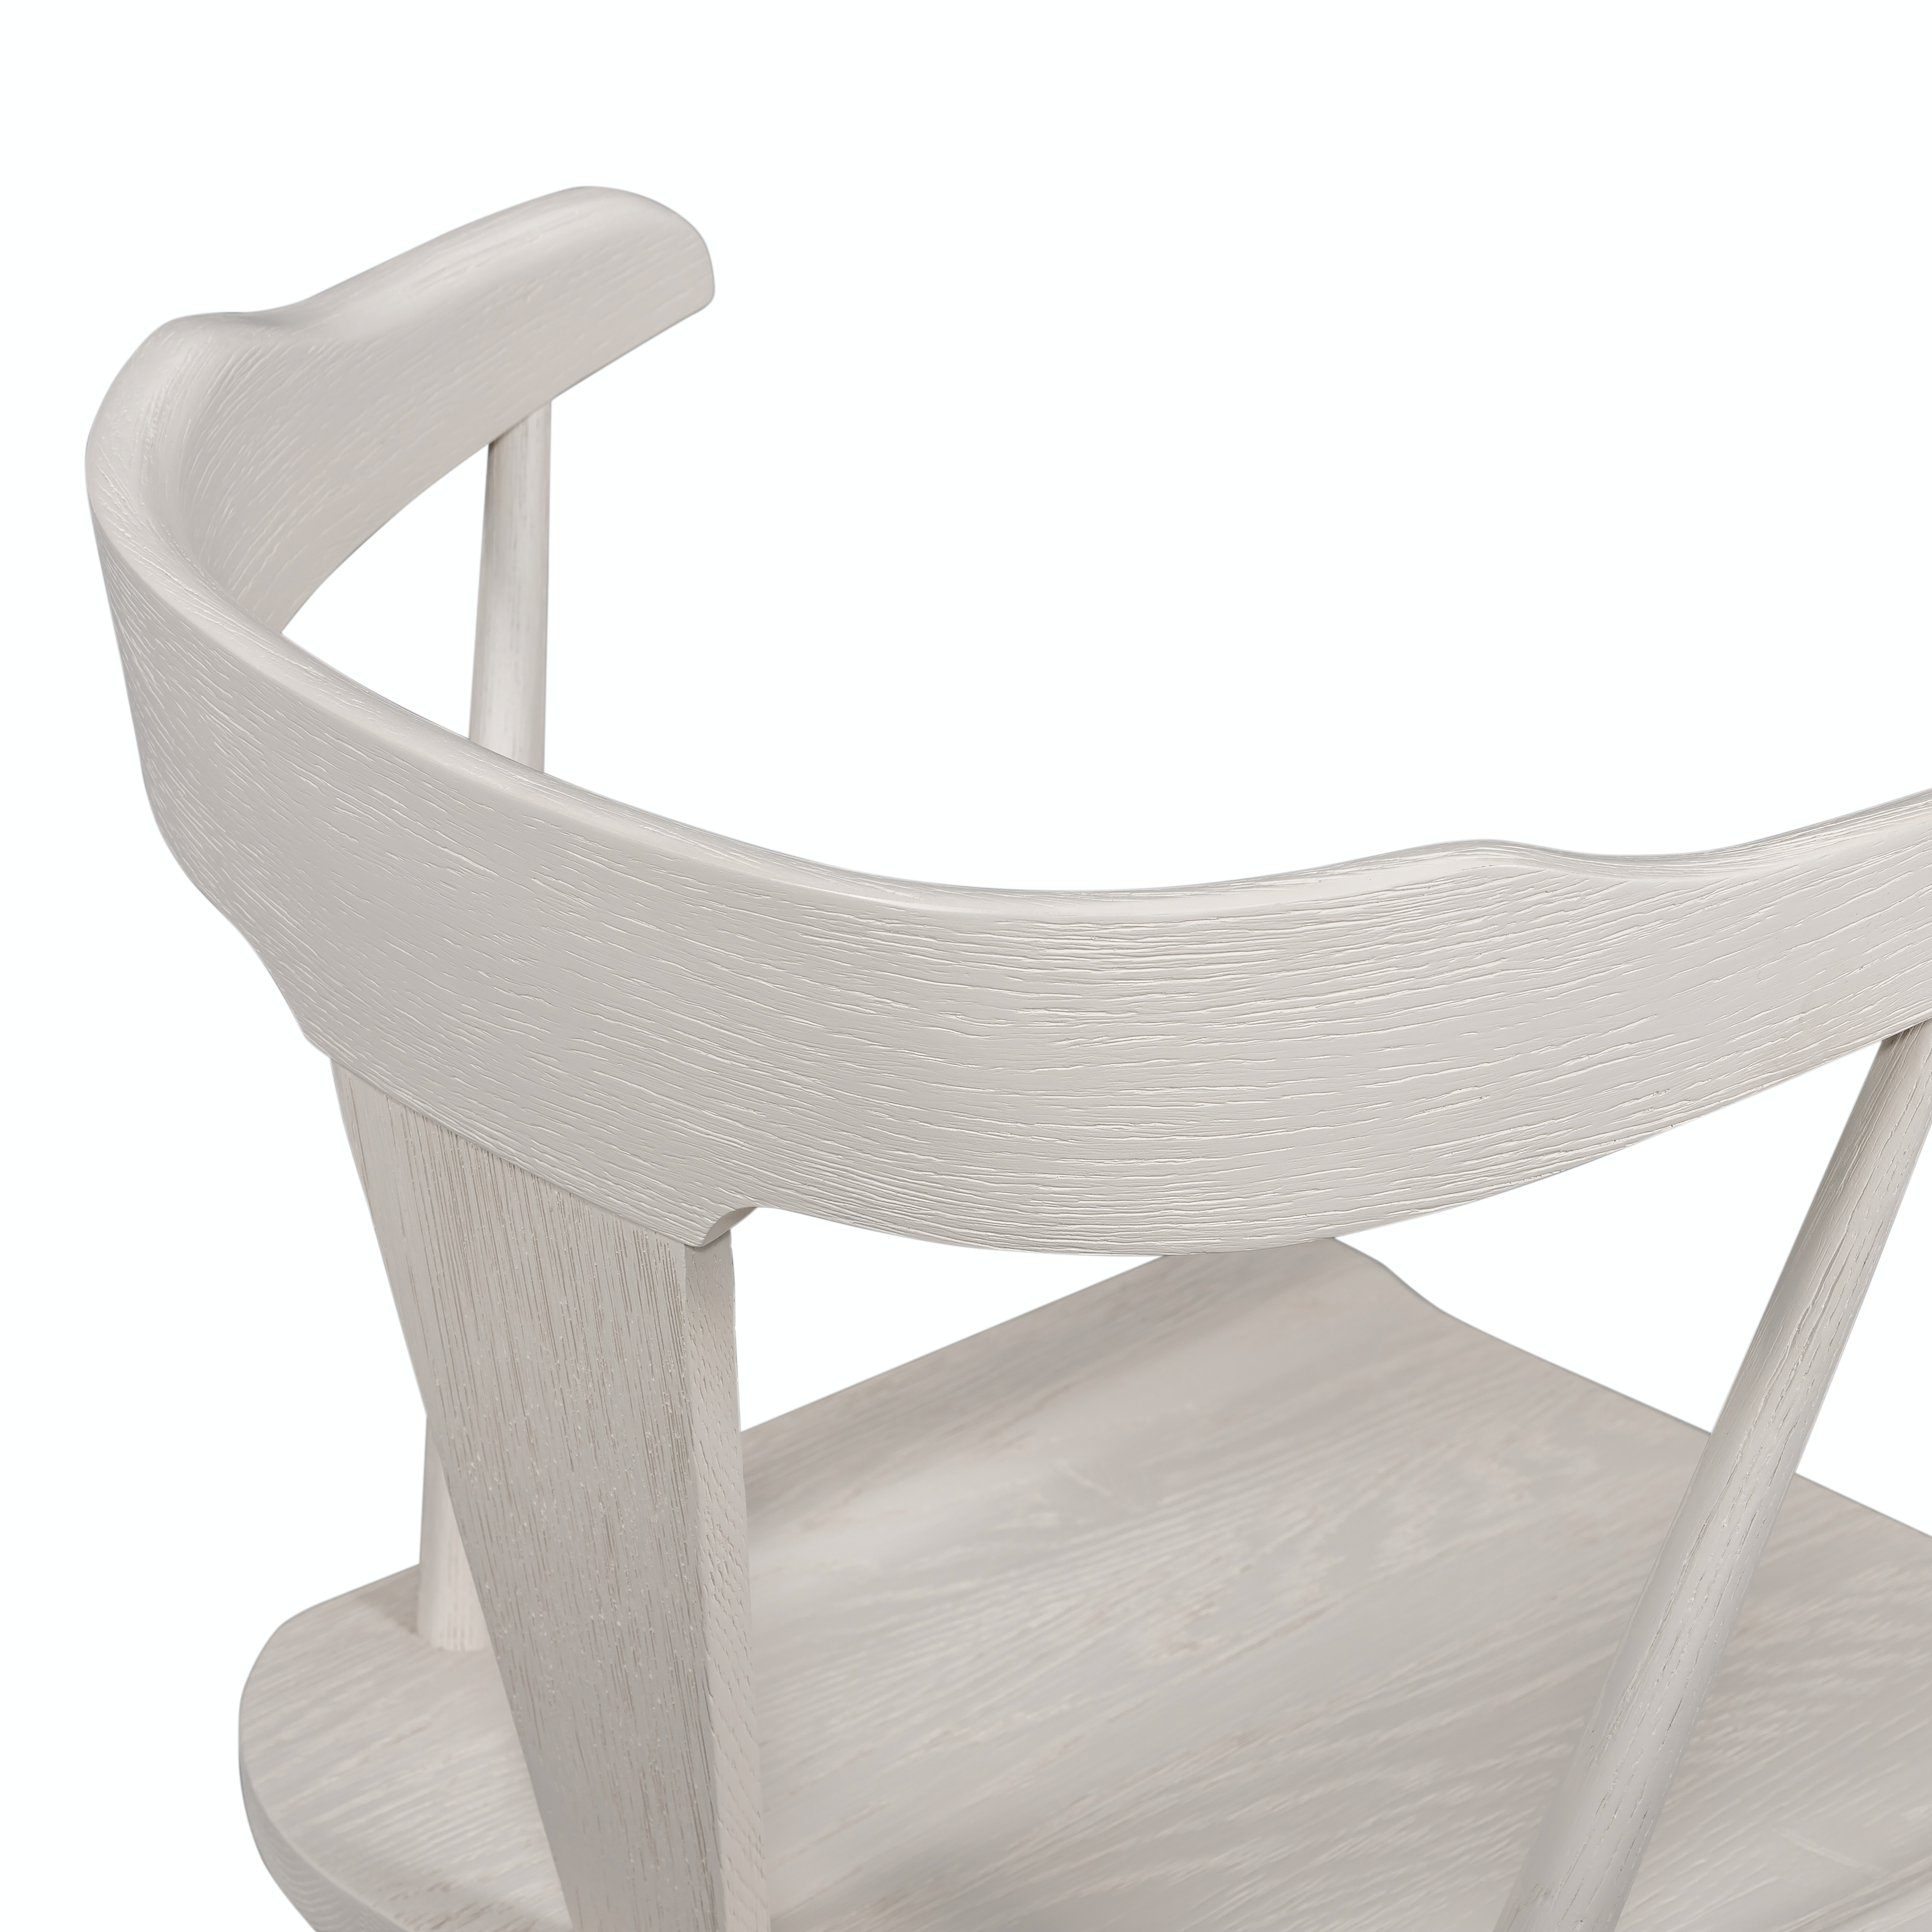 This new take on the mid-century Windsor chair, the Ripley Off White Dining Chair has a bowed, sculptural silhouette. The dining chair is done in an off-white finish to highlight the natural grain of weathered oak. Amethyst Home provides interior design, new construction, custom furniture, and rugs for the New York metro area.